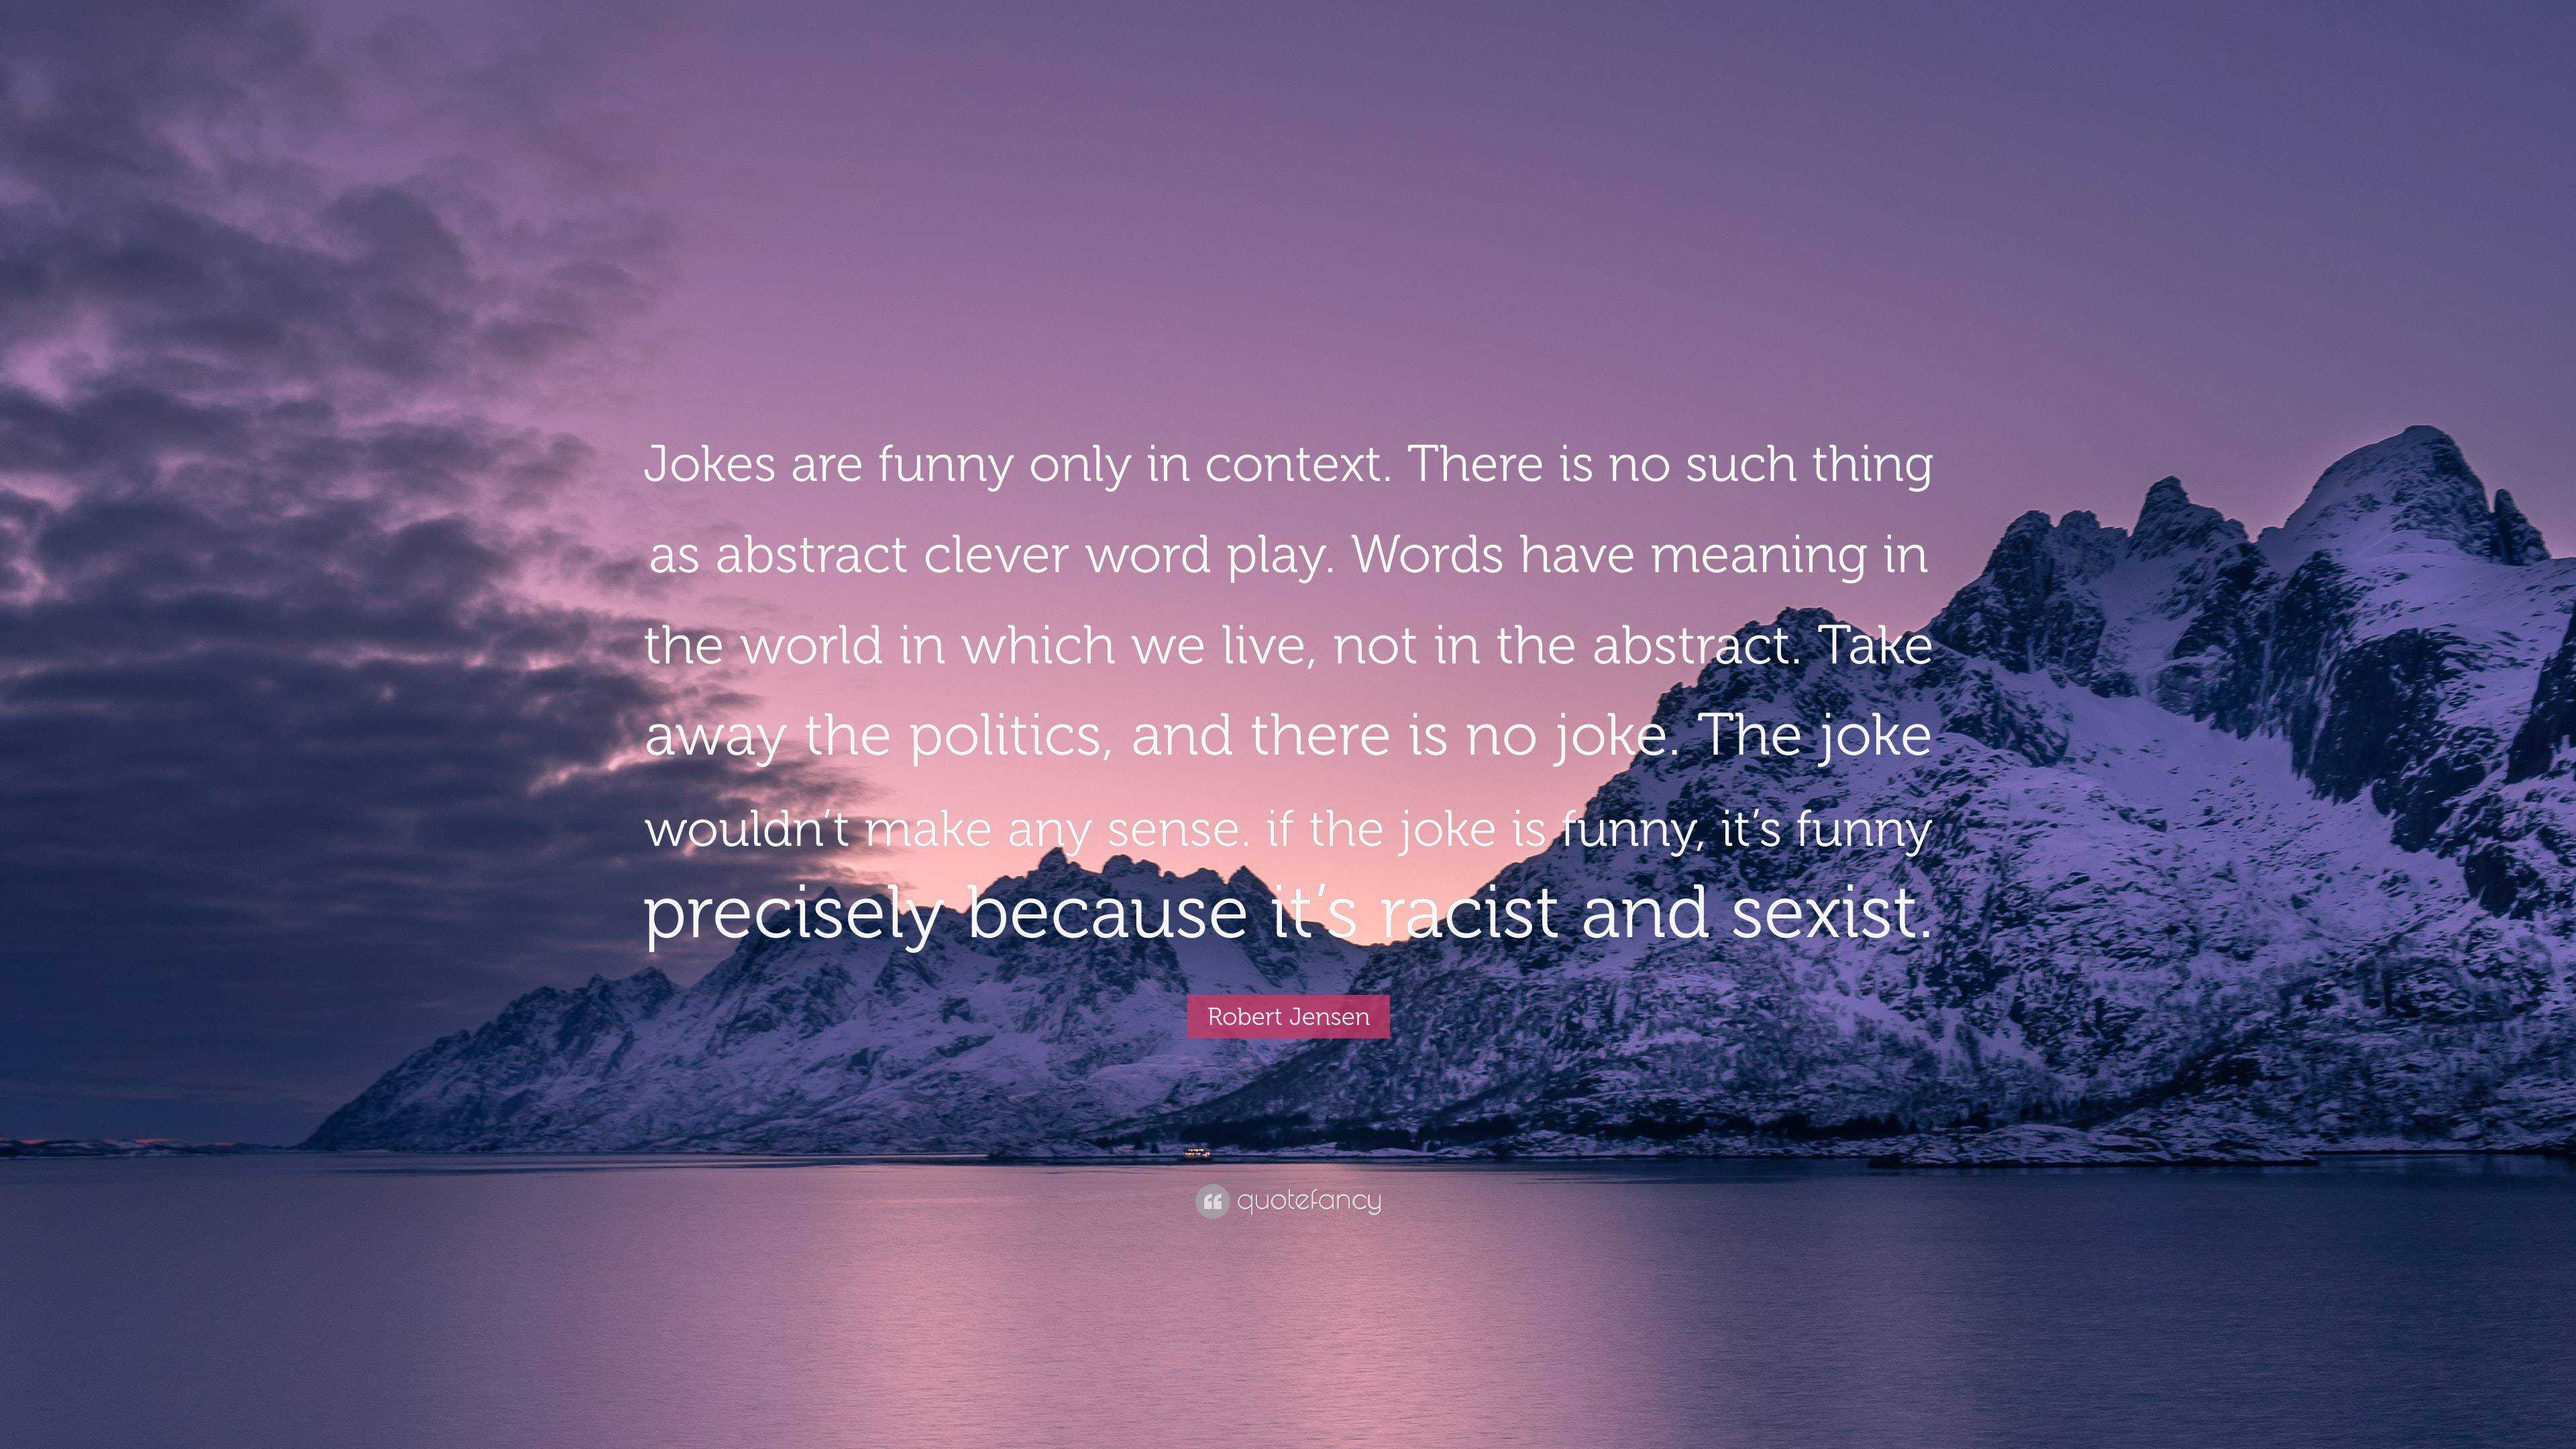 Robert Jensen Quote: “Jokes are funny only in context. There is no such  thing as abstract clever word play. Words have meaning in the world in...”